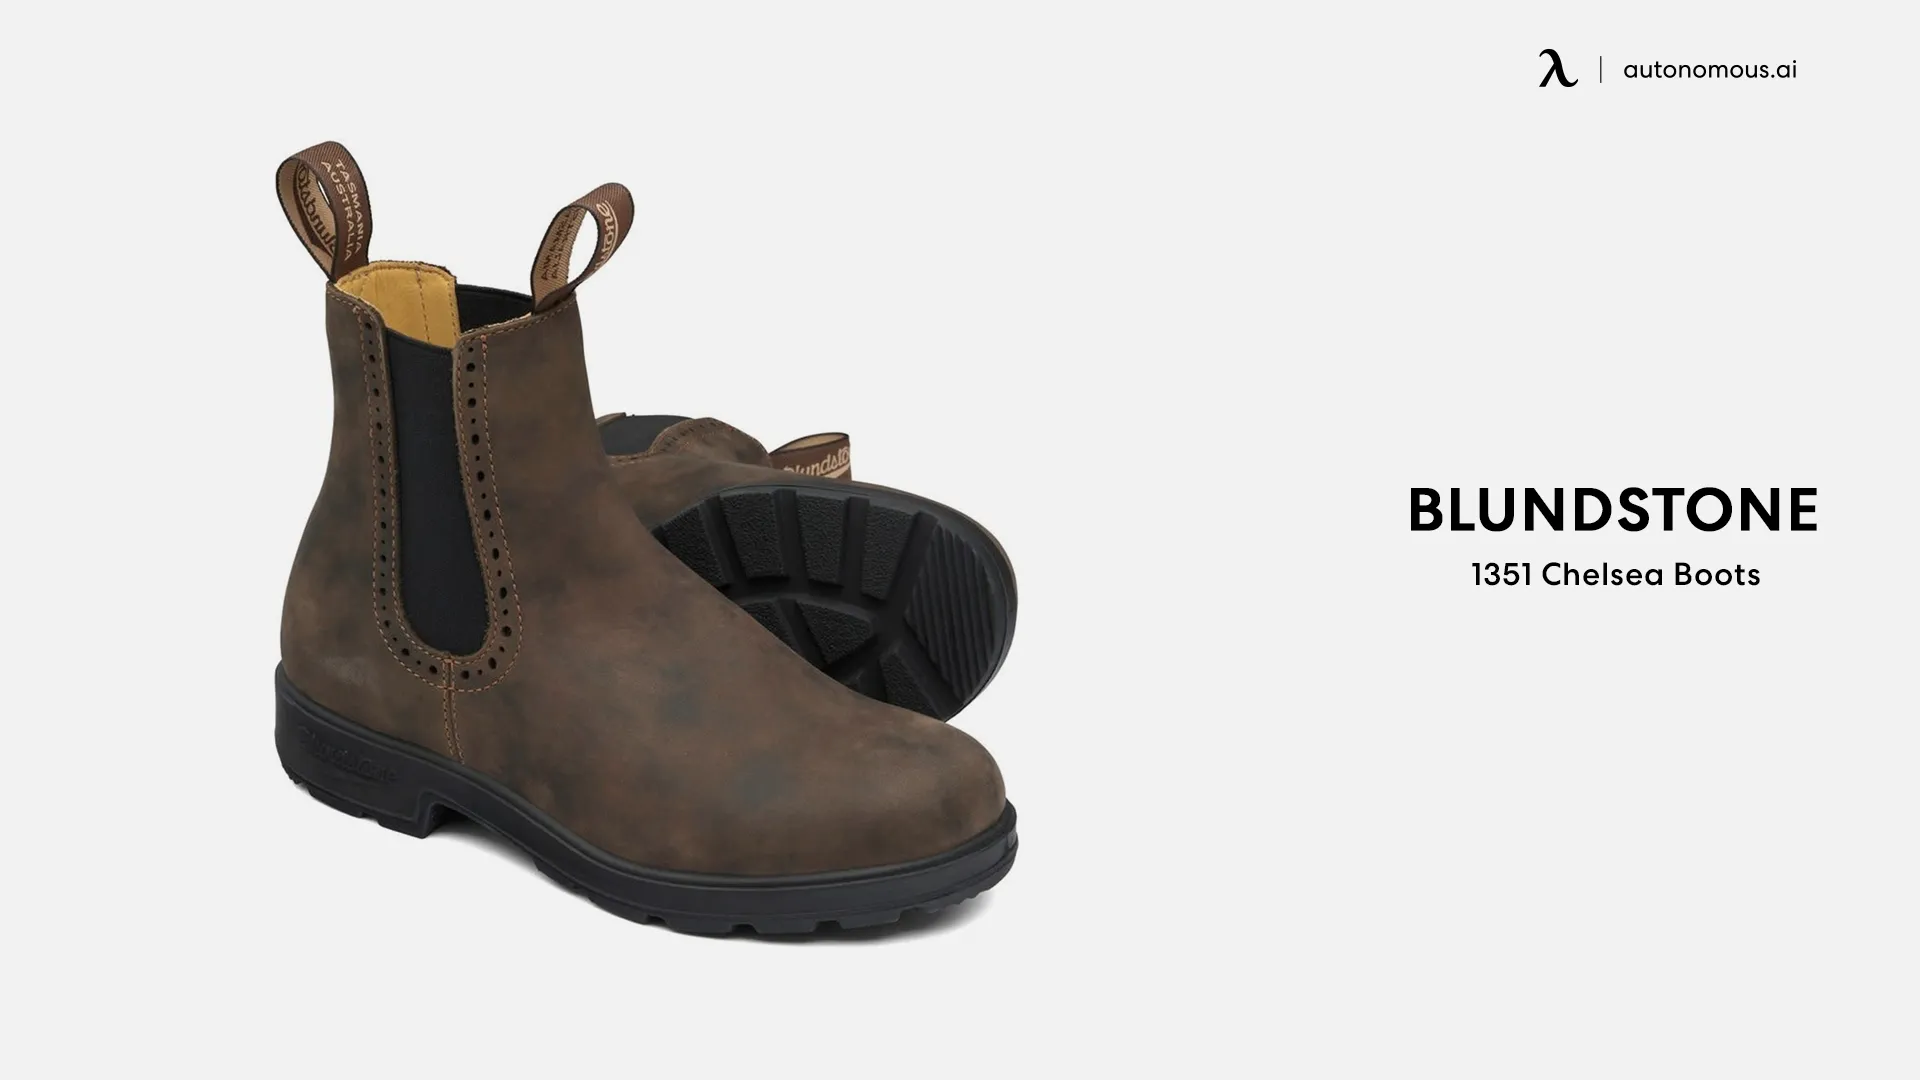 Blundstone 1351 Chelsea Boots